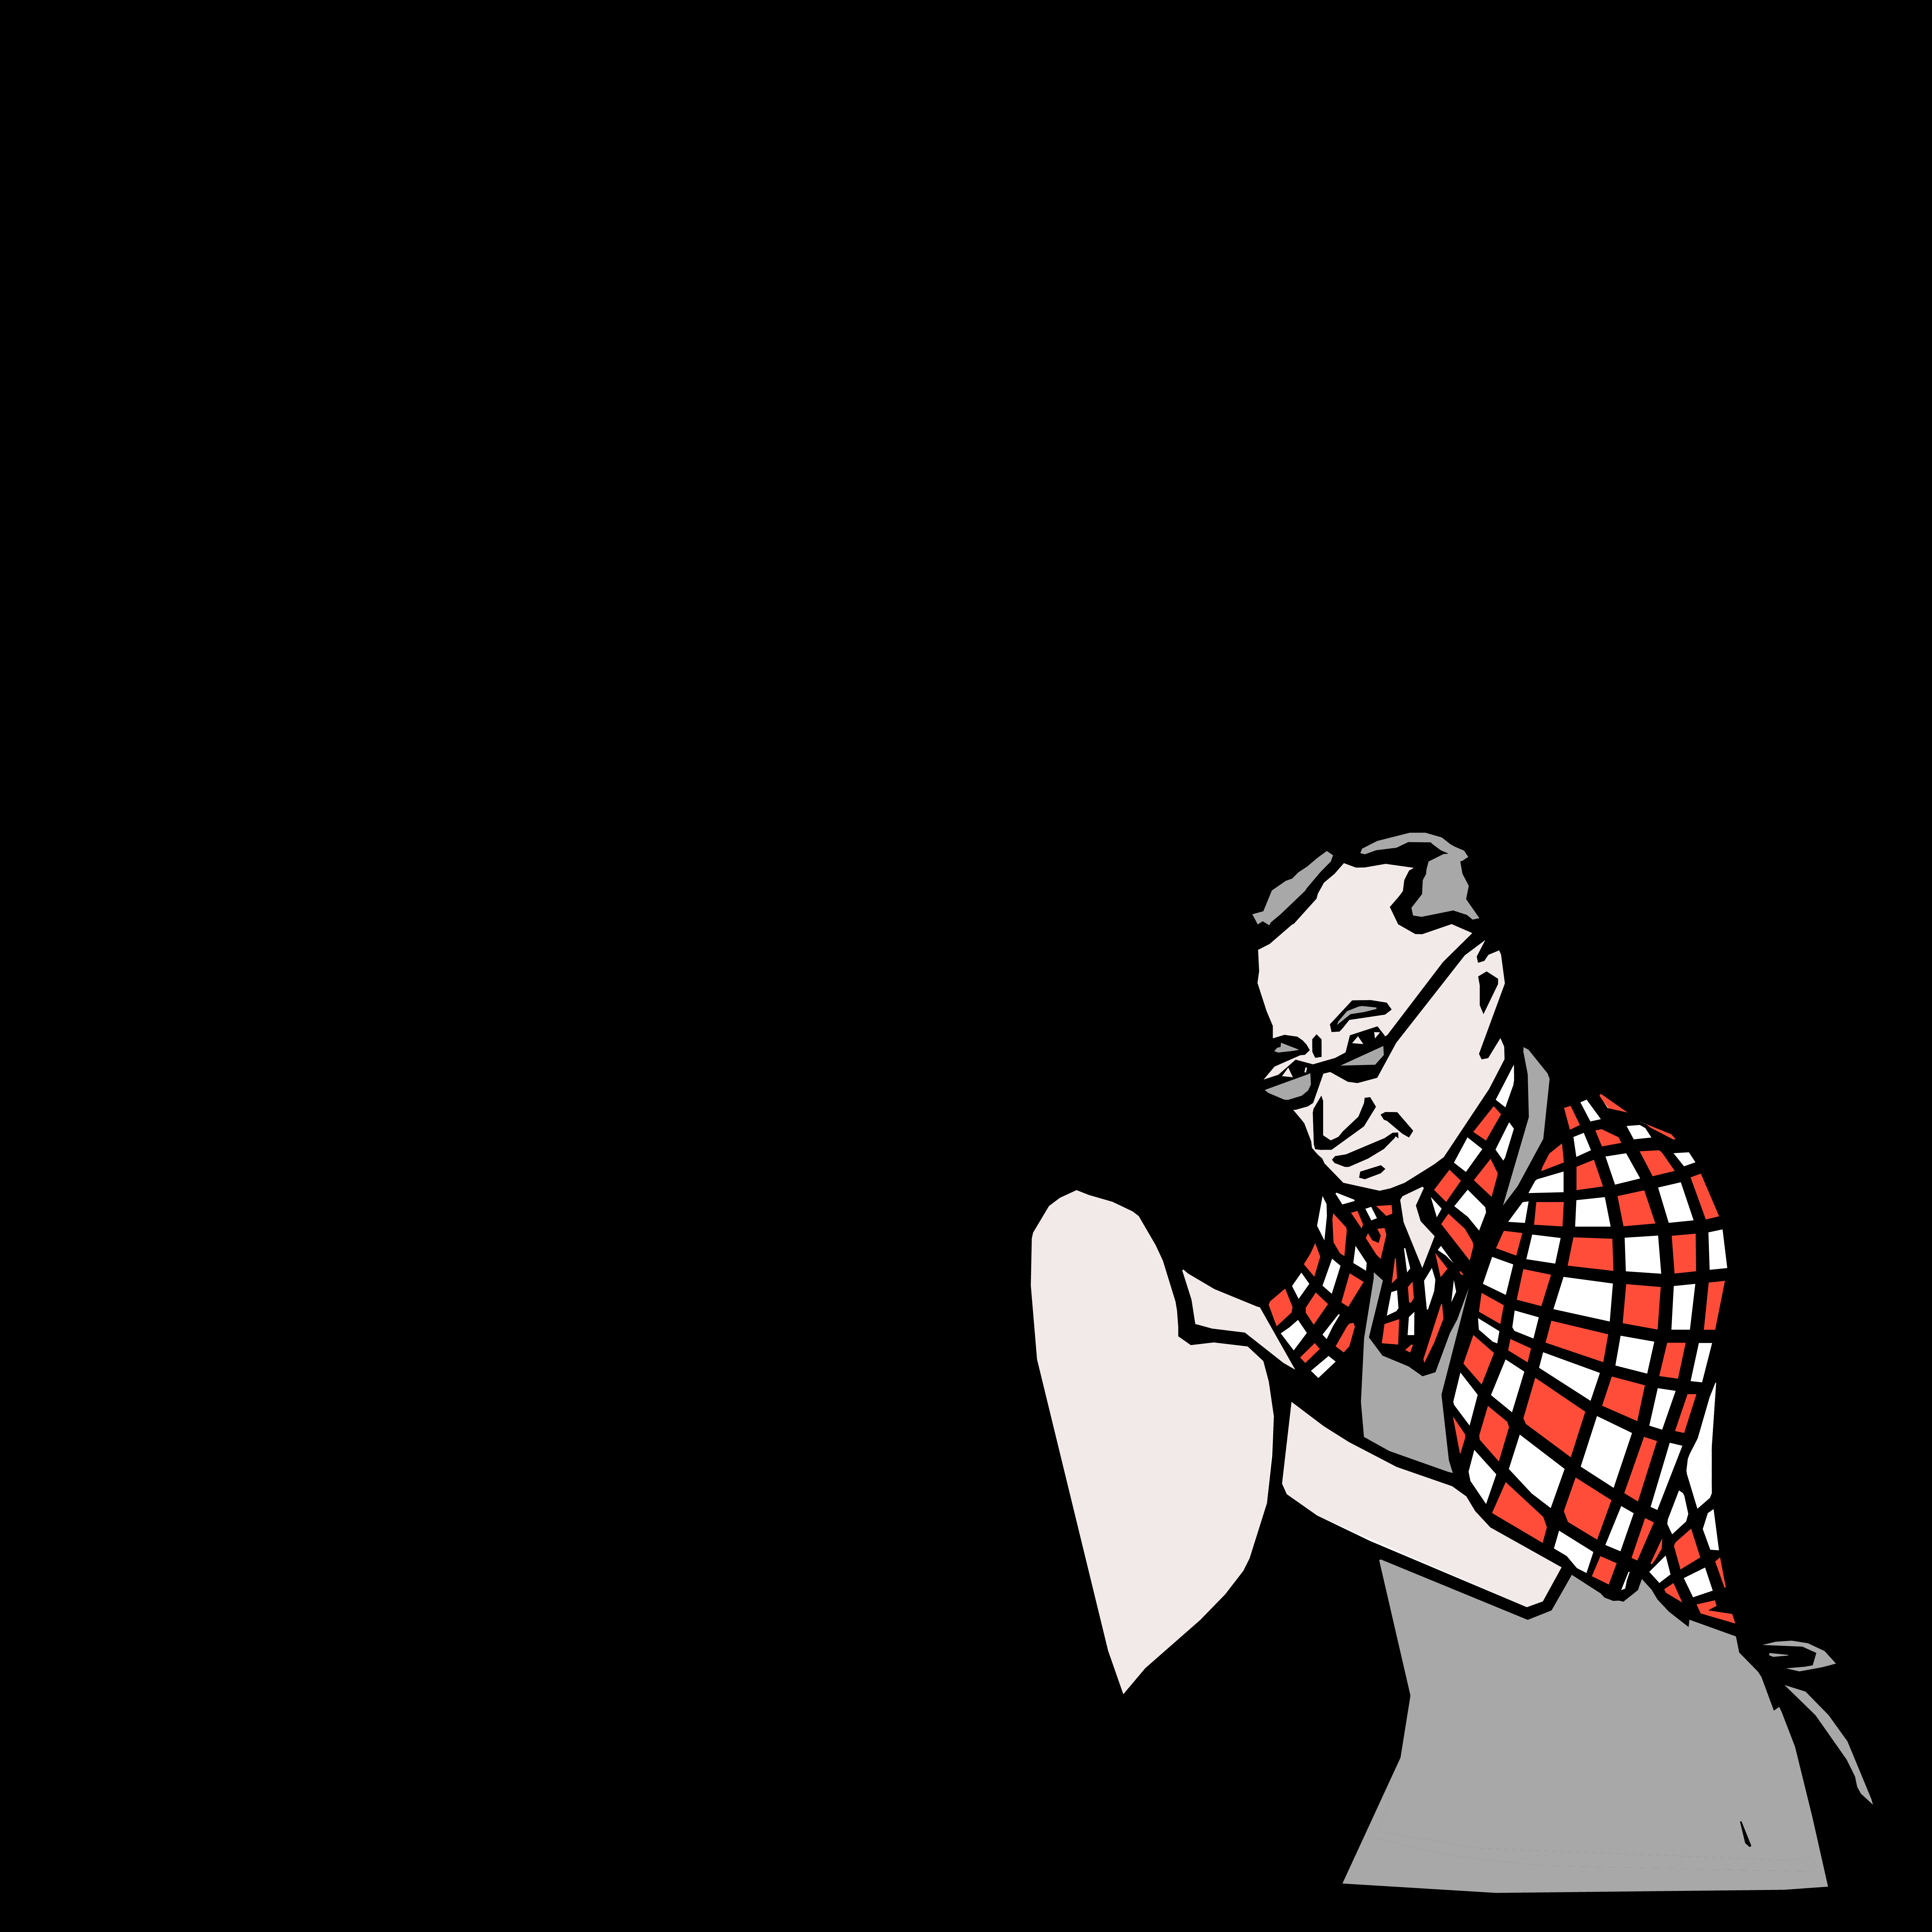 An illustration of Domenico DeMarco making pizza. The pizza is in the shape of a heart. He's wearing a checked red and white shirt.